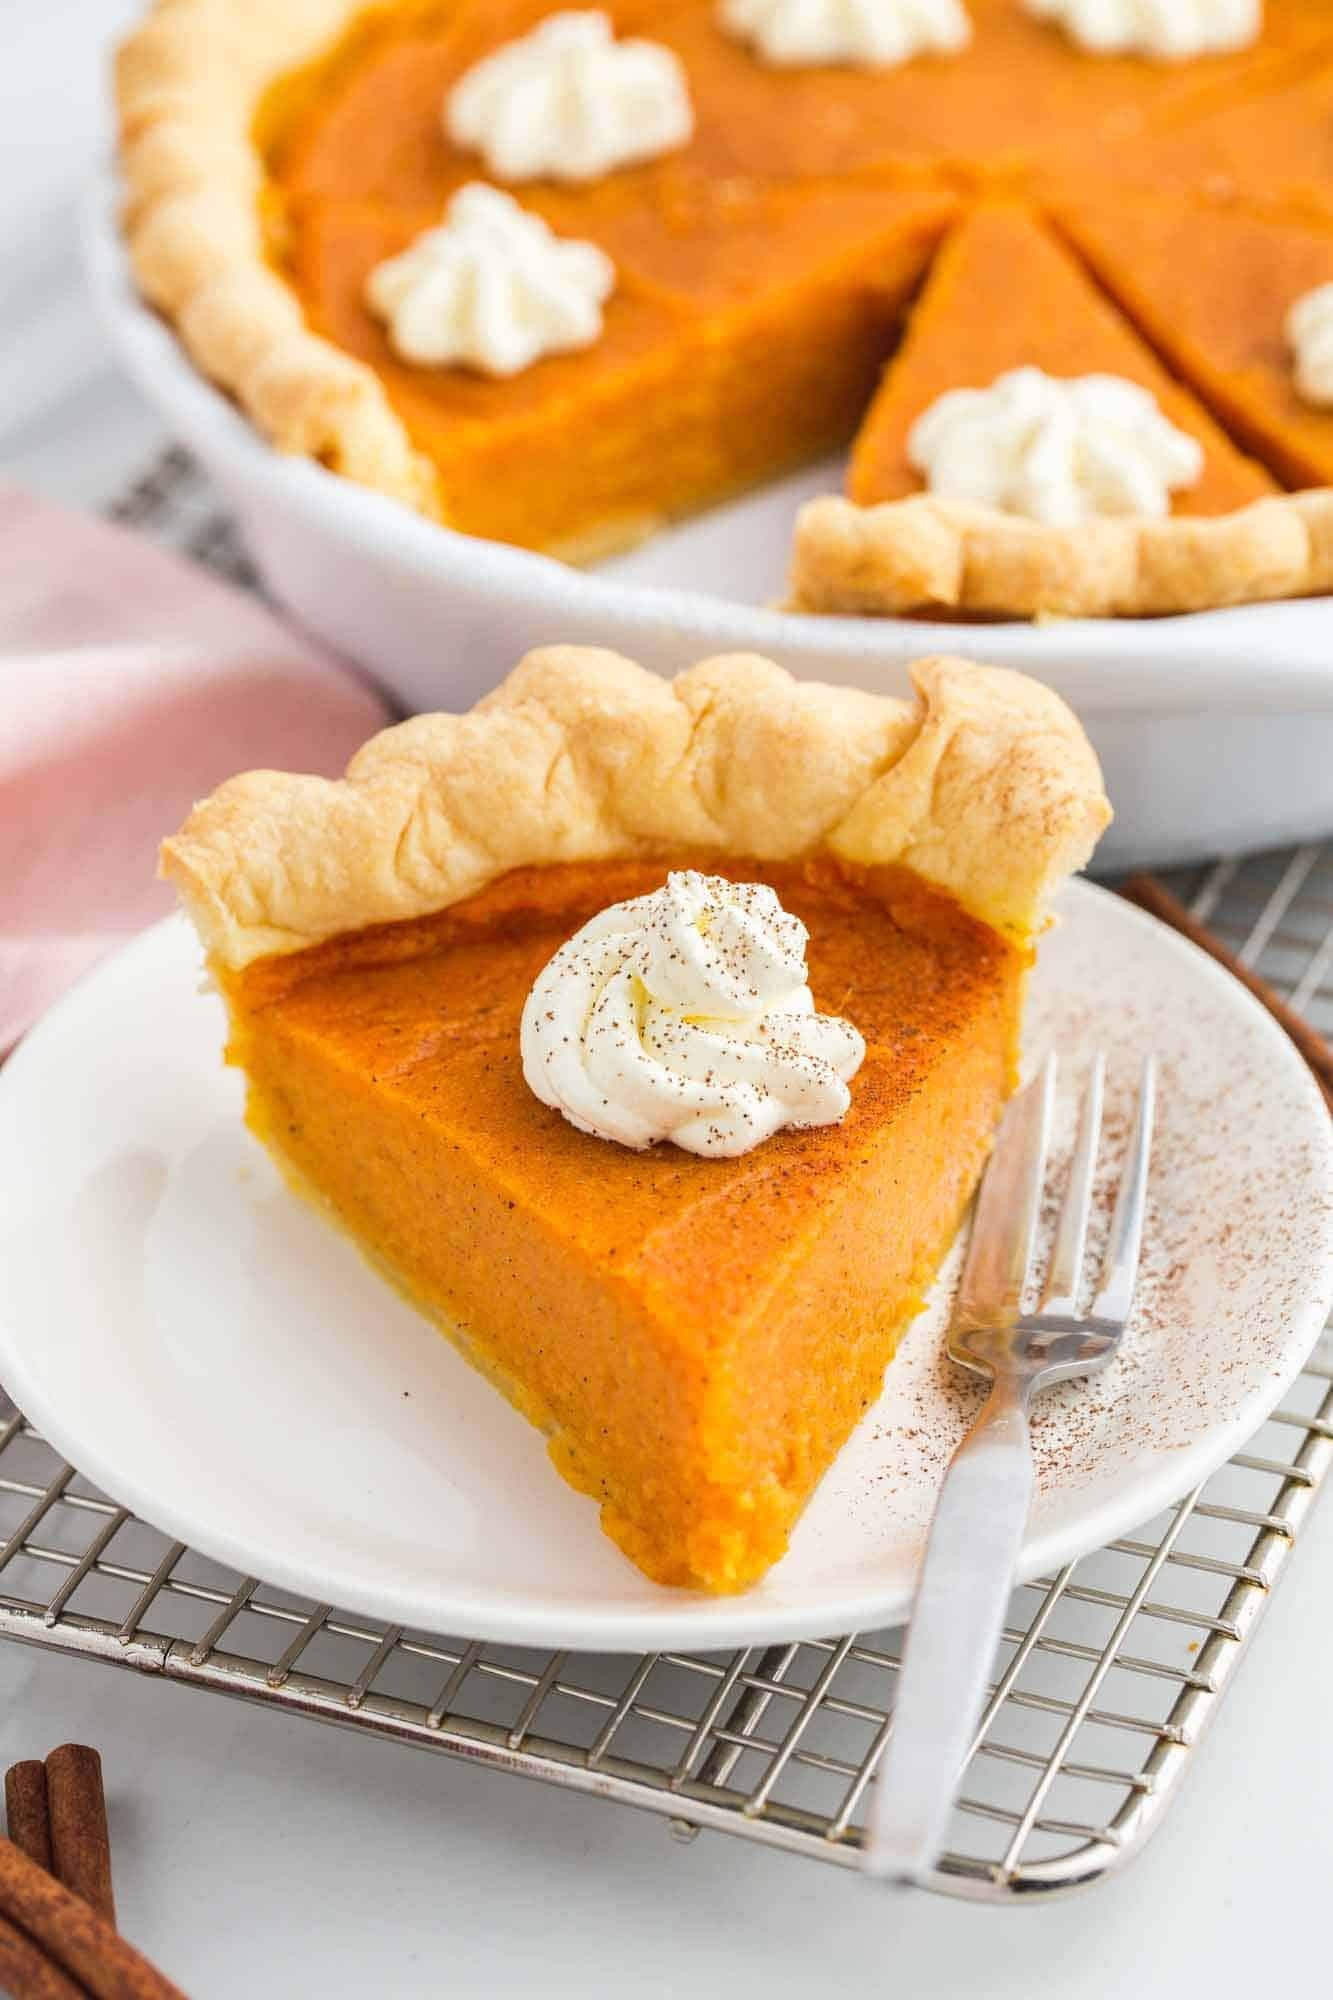 Pie: Combines mashed sweet potatoes with sugar, milk, and spices. 1340x2000 HD Wallpaper.